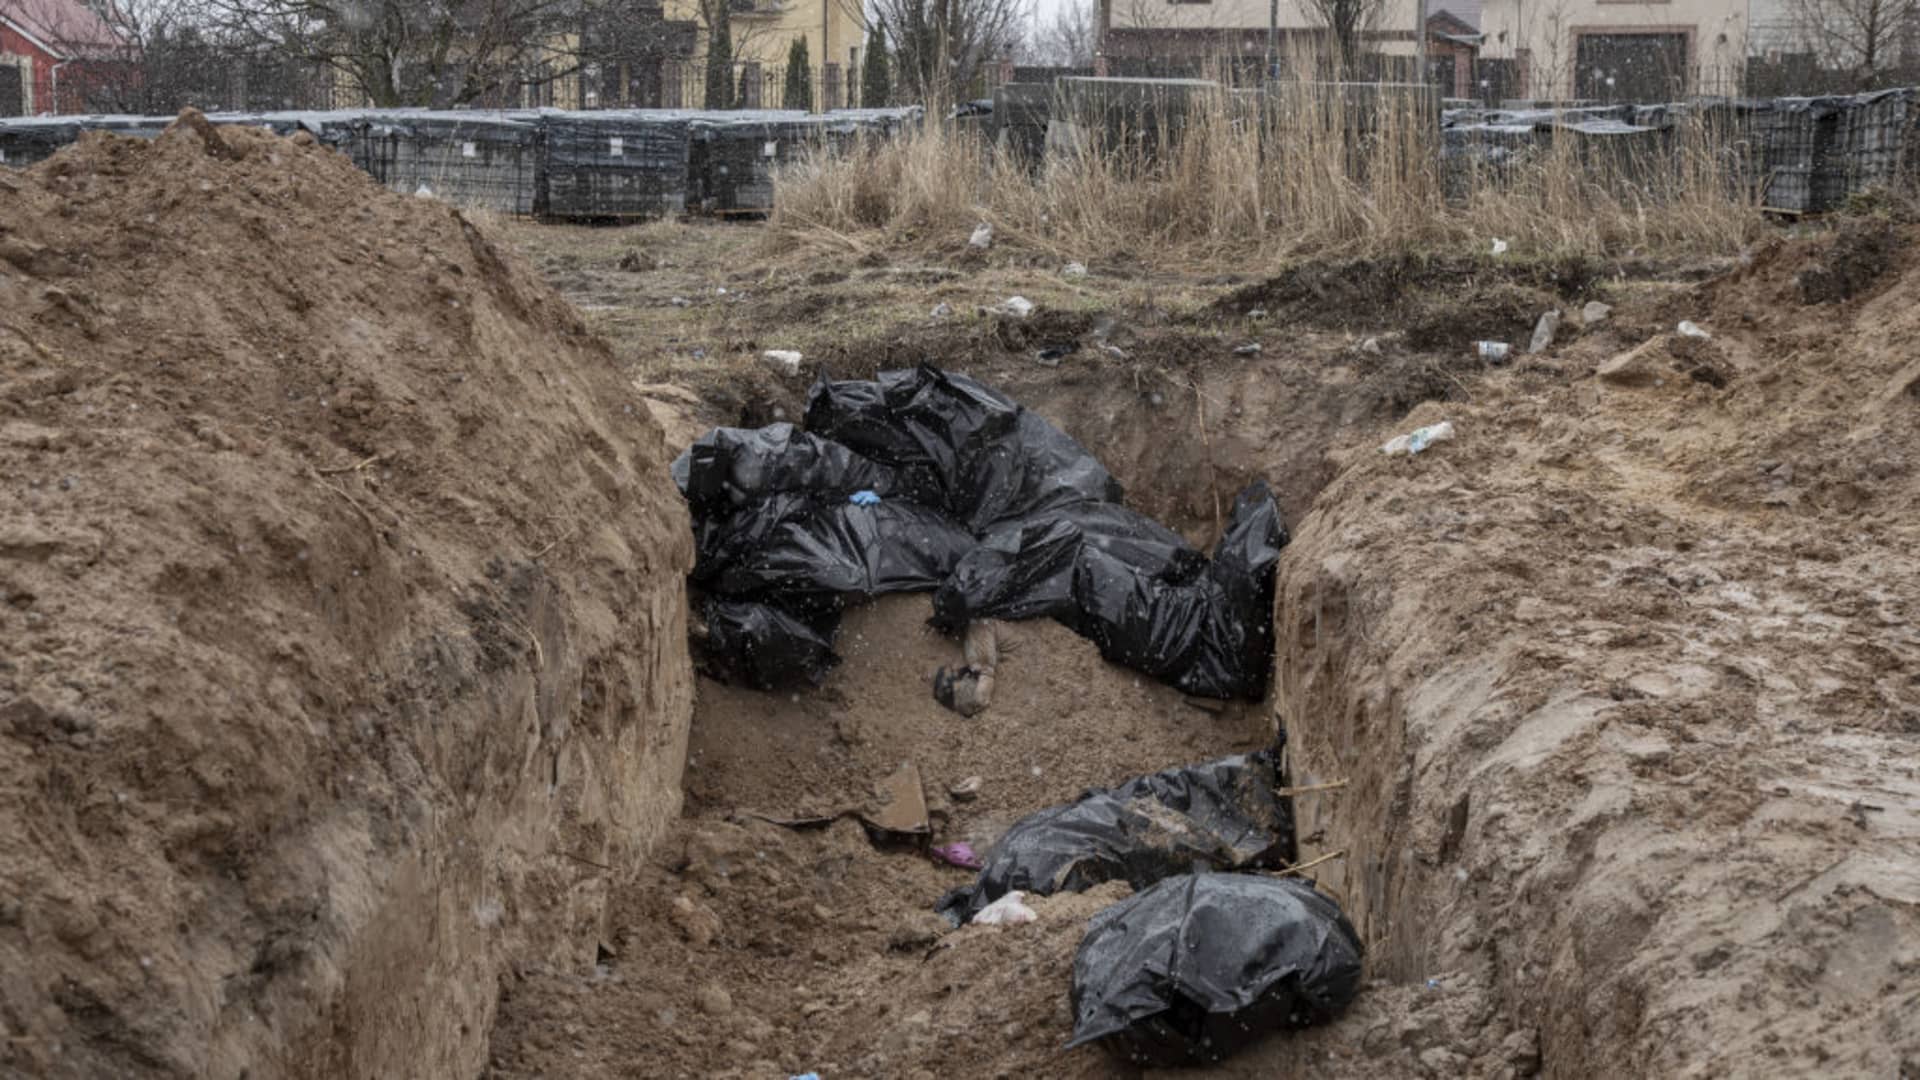 Bodies of civilians are seen in a mass grave in the town of Bucha, on the outskirts of Kyiv, after the Ukrainian army secured the area following the withdrawal of the Russian army from the Kyiv region on previous days, Bucha, Ukraine on April 03, 2022.